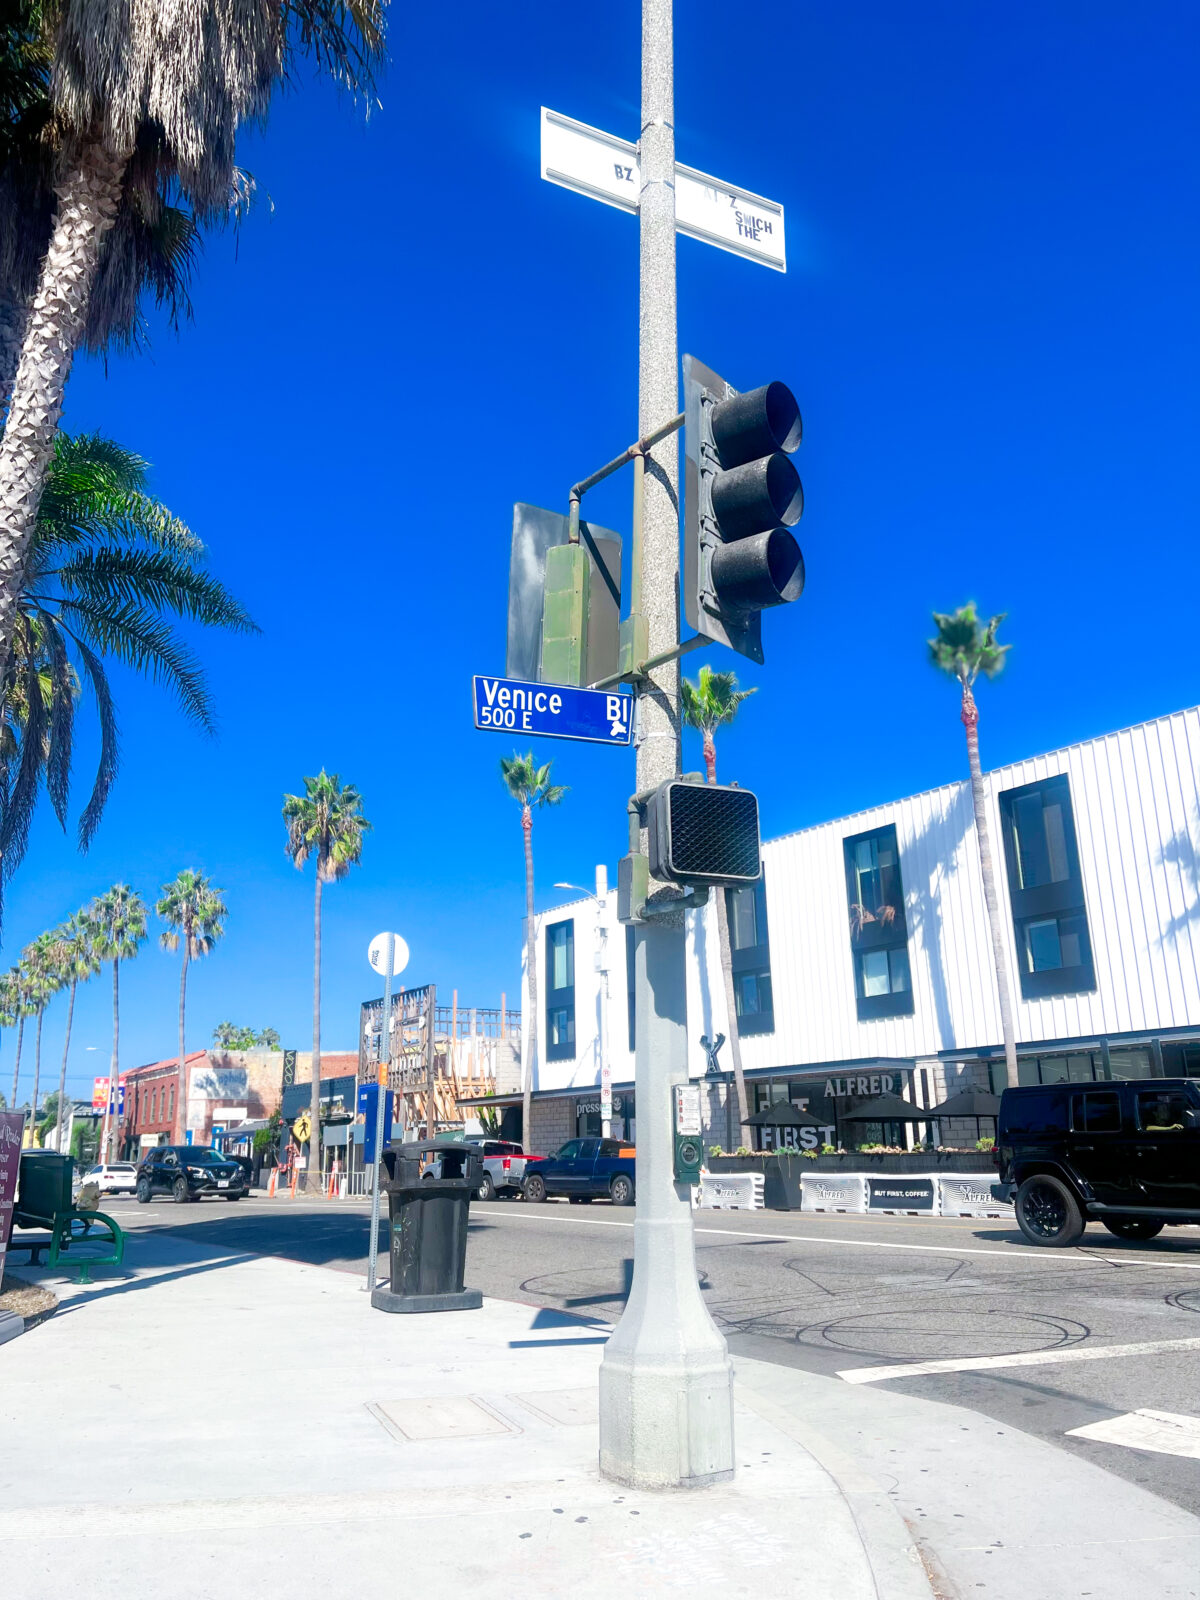 Discover the best shopping streets in Los Angeles with trendy, cool vibes, that you're going to want to visit during your next trip to LA!